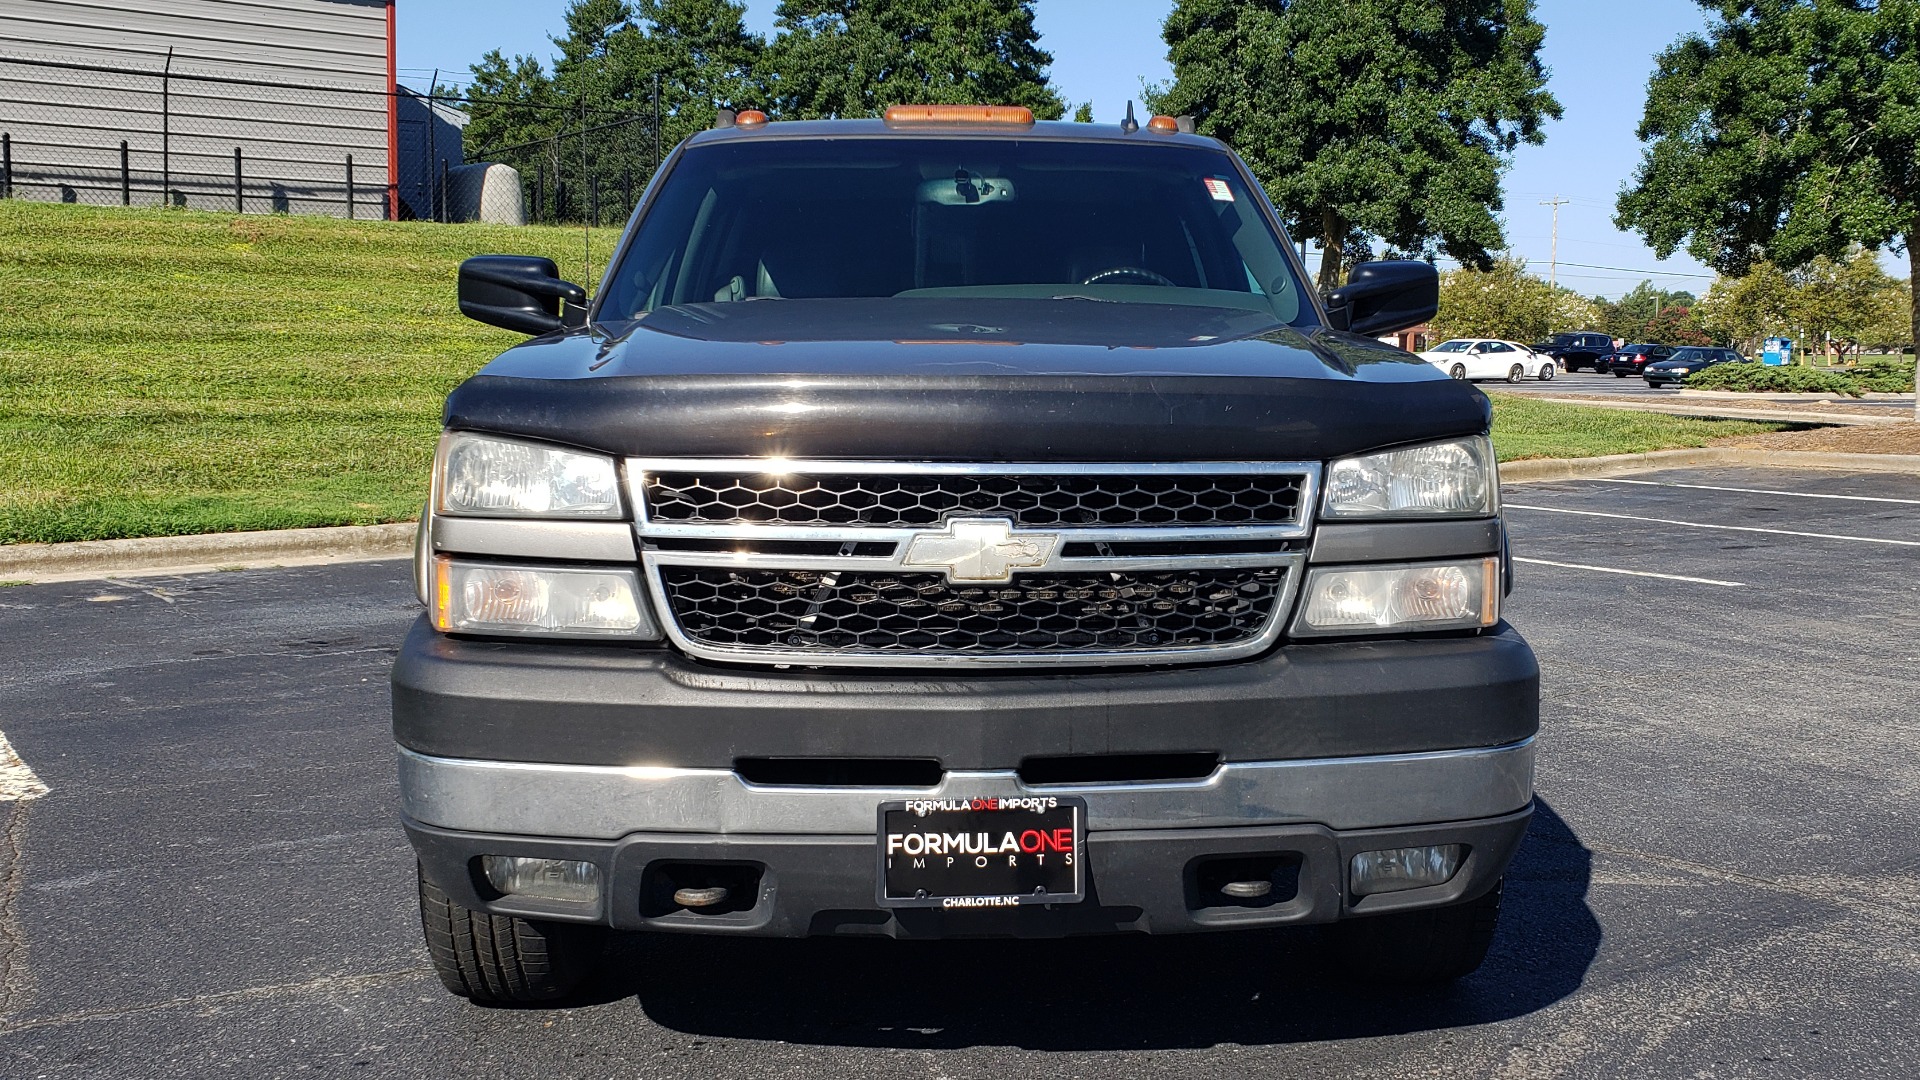 Used 2007 Chevrolet SILVERADO 2500HD CLASSIC LT3 CREWCAB / 4WD / 6.6L DURAMAX / SUNROOF / BOSE / CAMPER SHELL for sale Sold at Formula Imports in Charlotte NC 28227 23